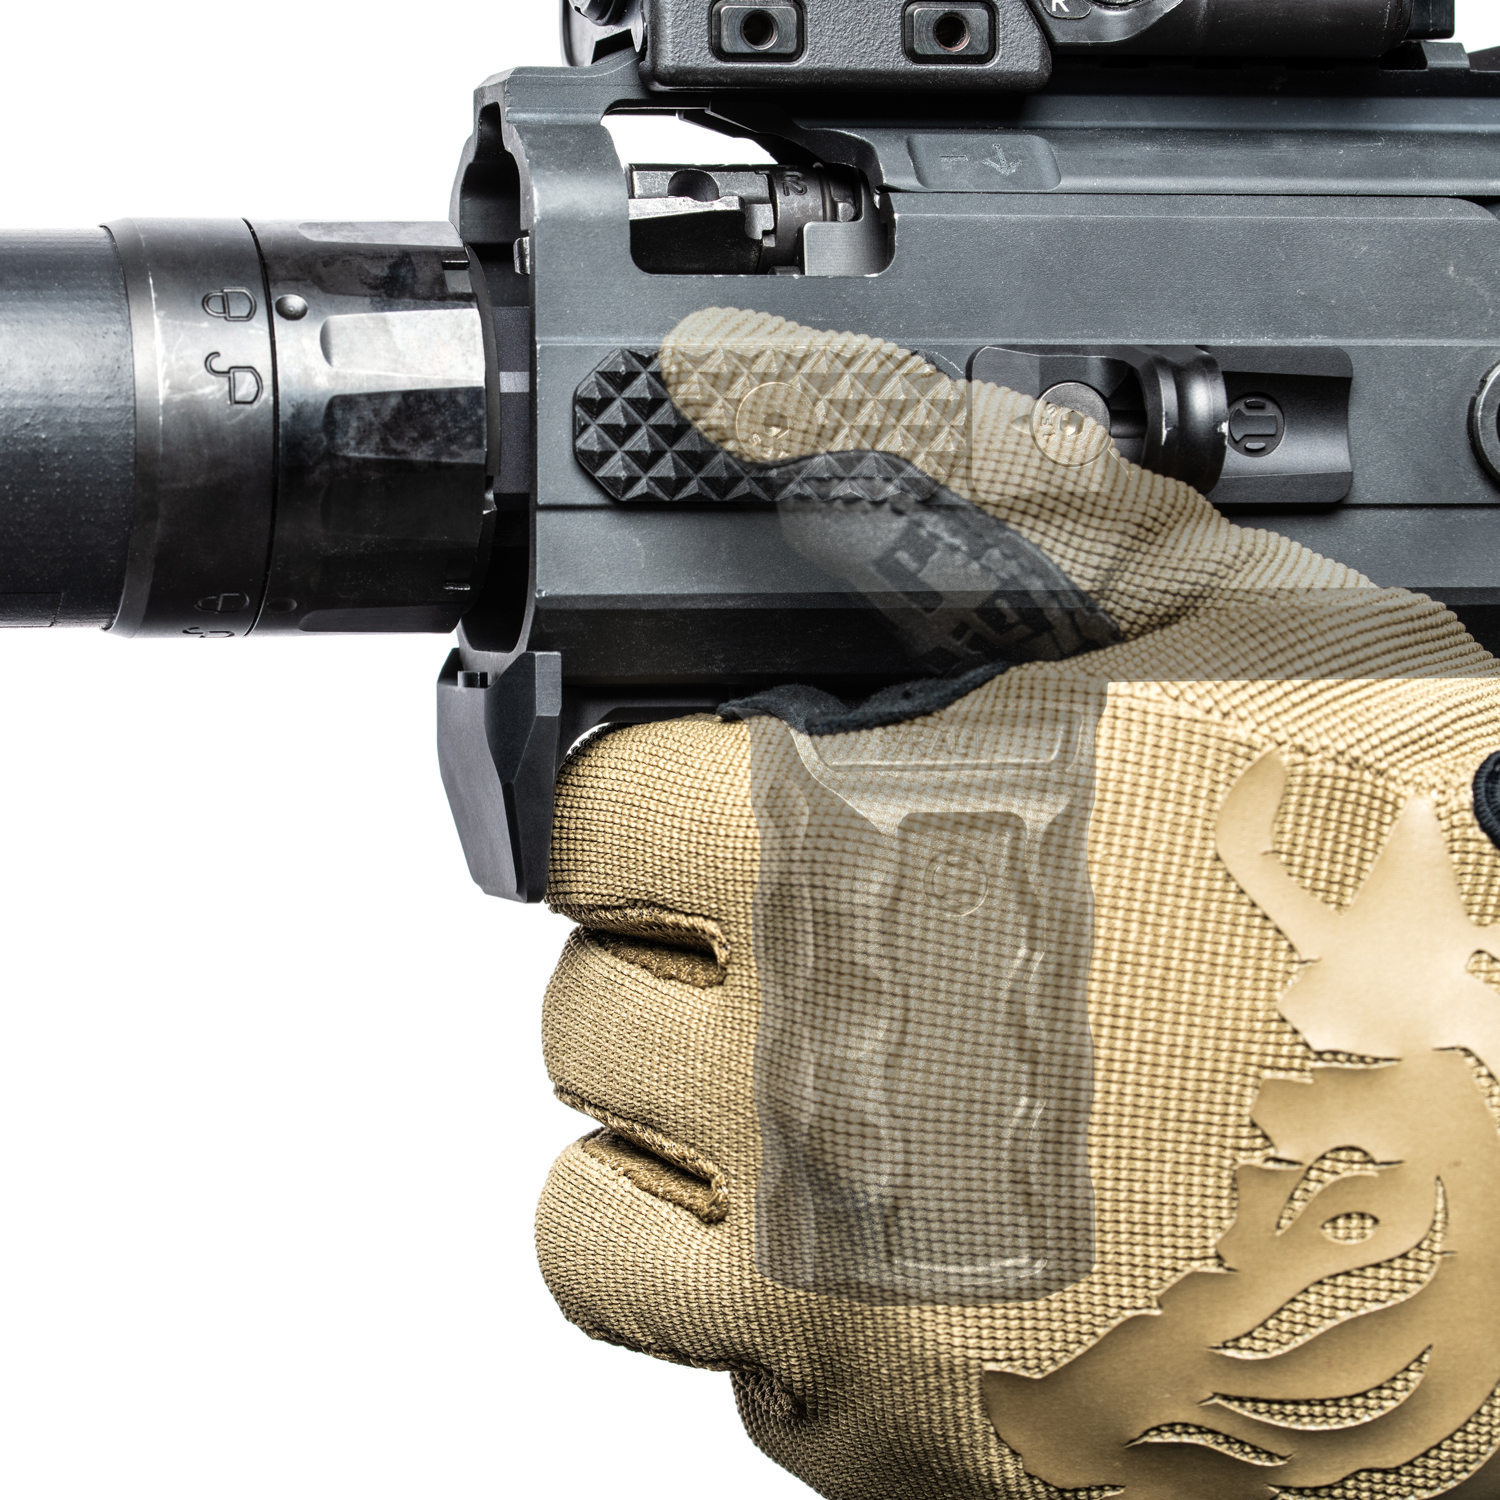 how to use angled foregrip